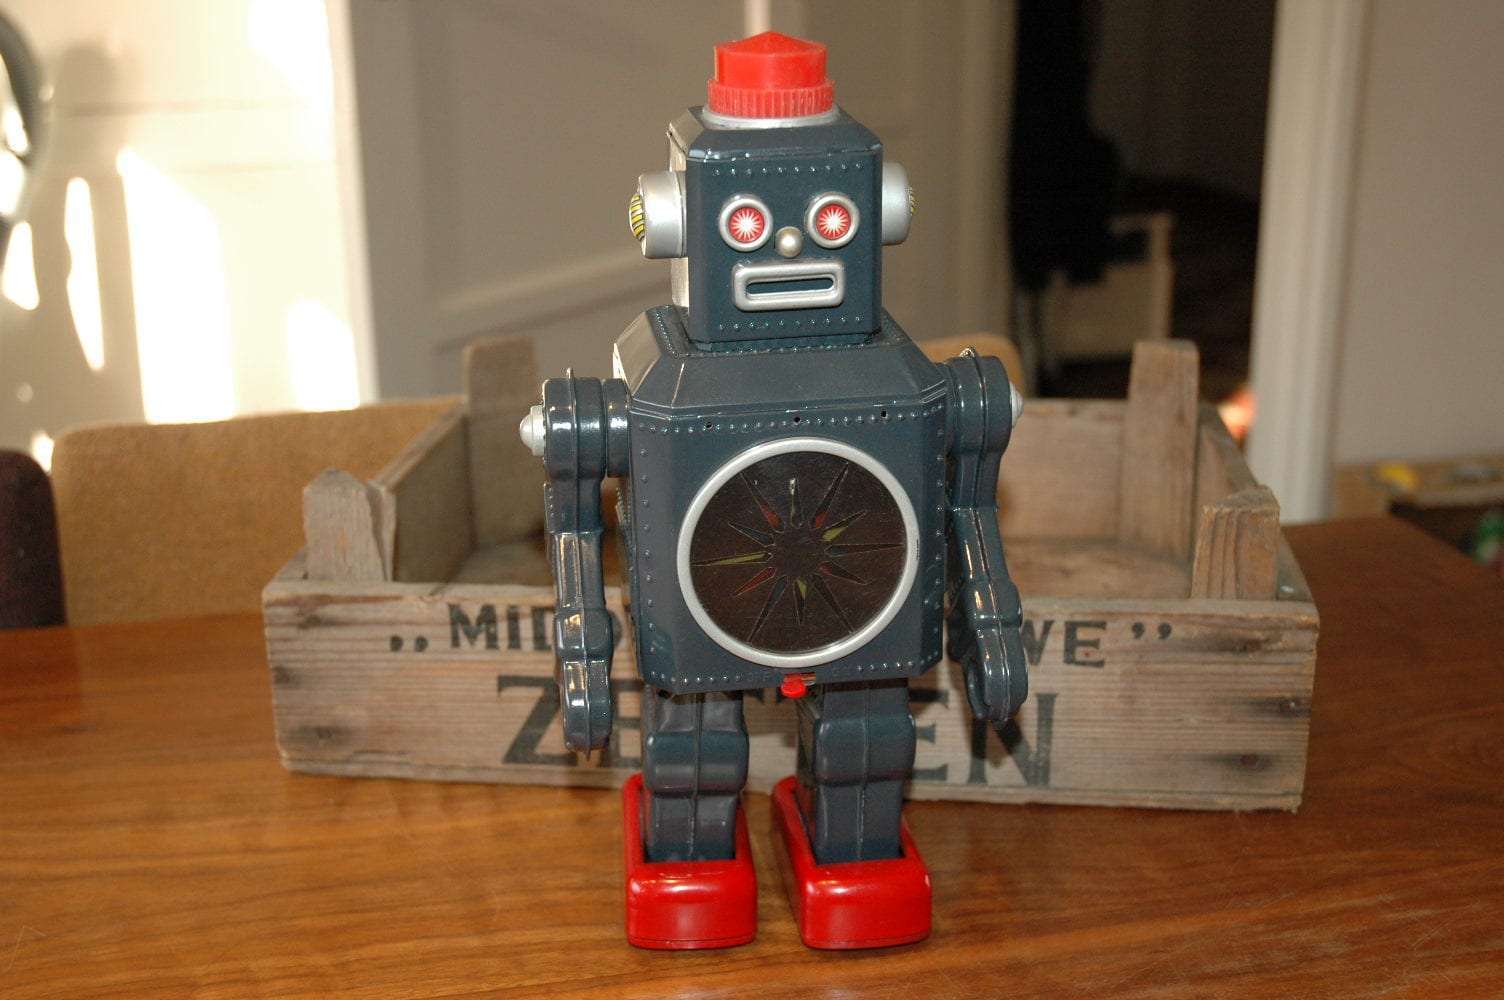 Modern Toys - Mighty 8 Robot